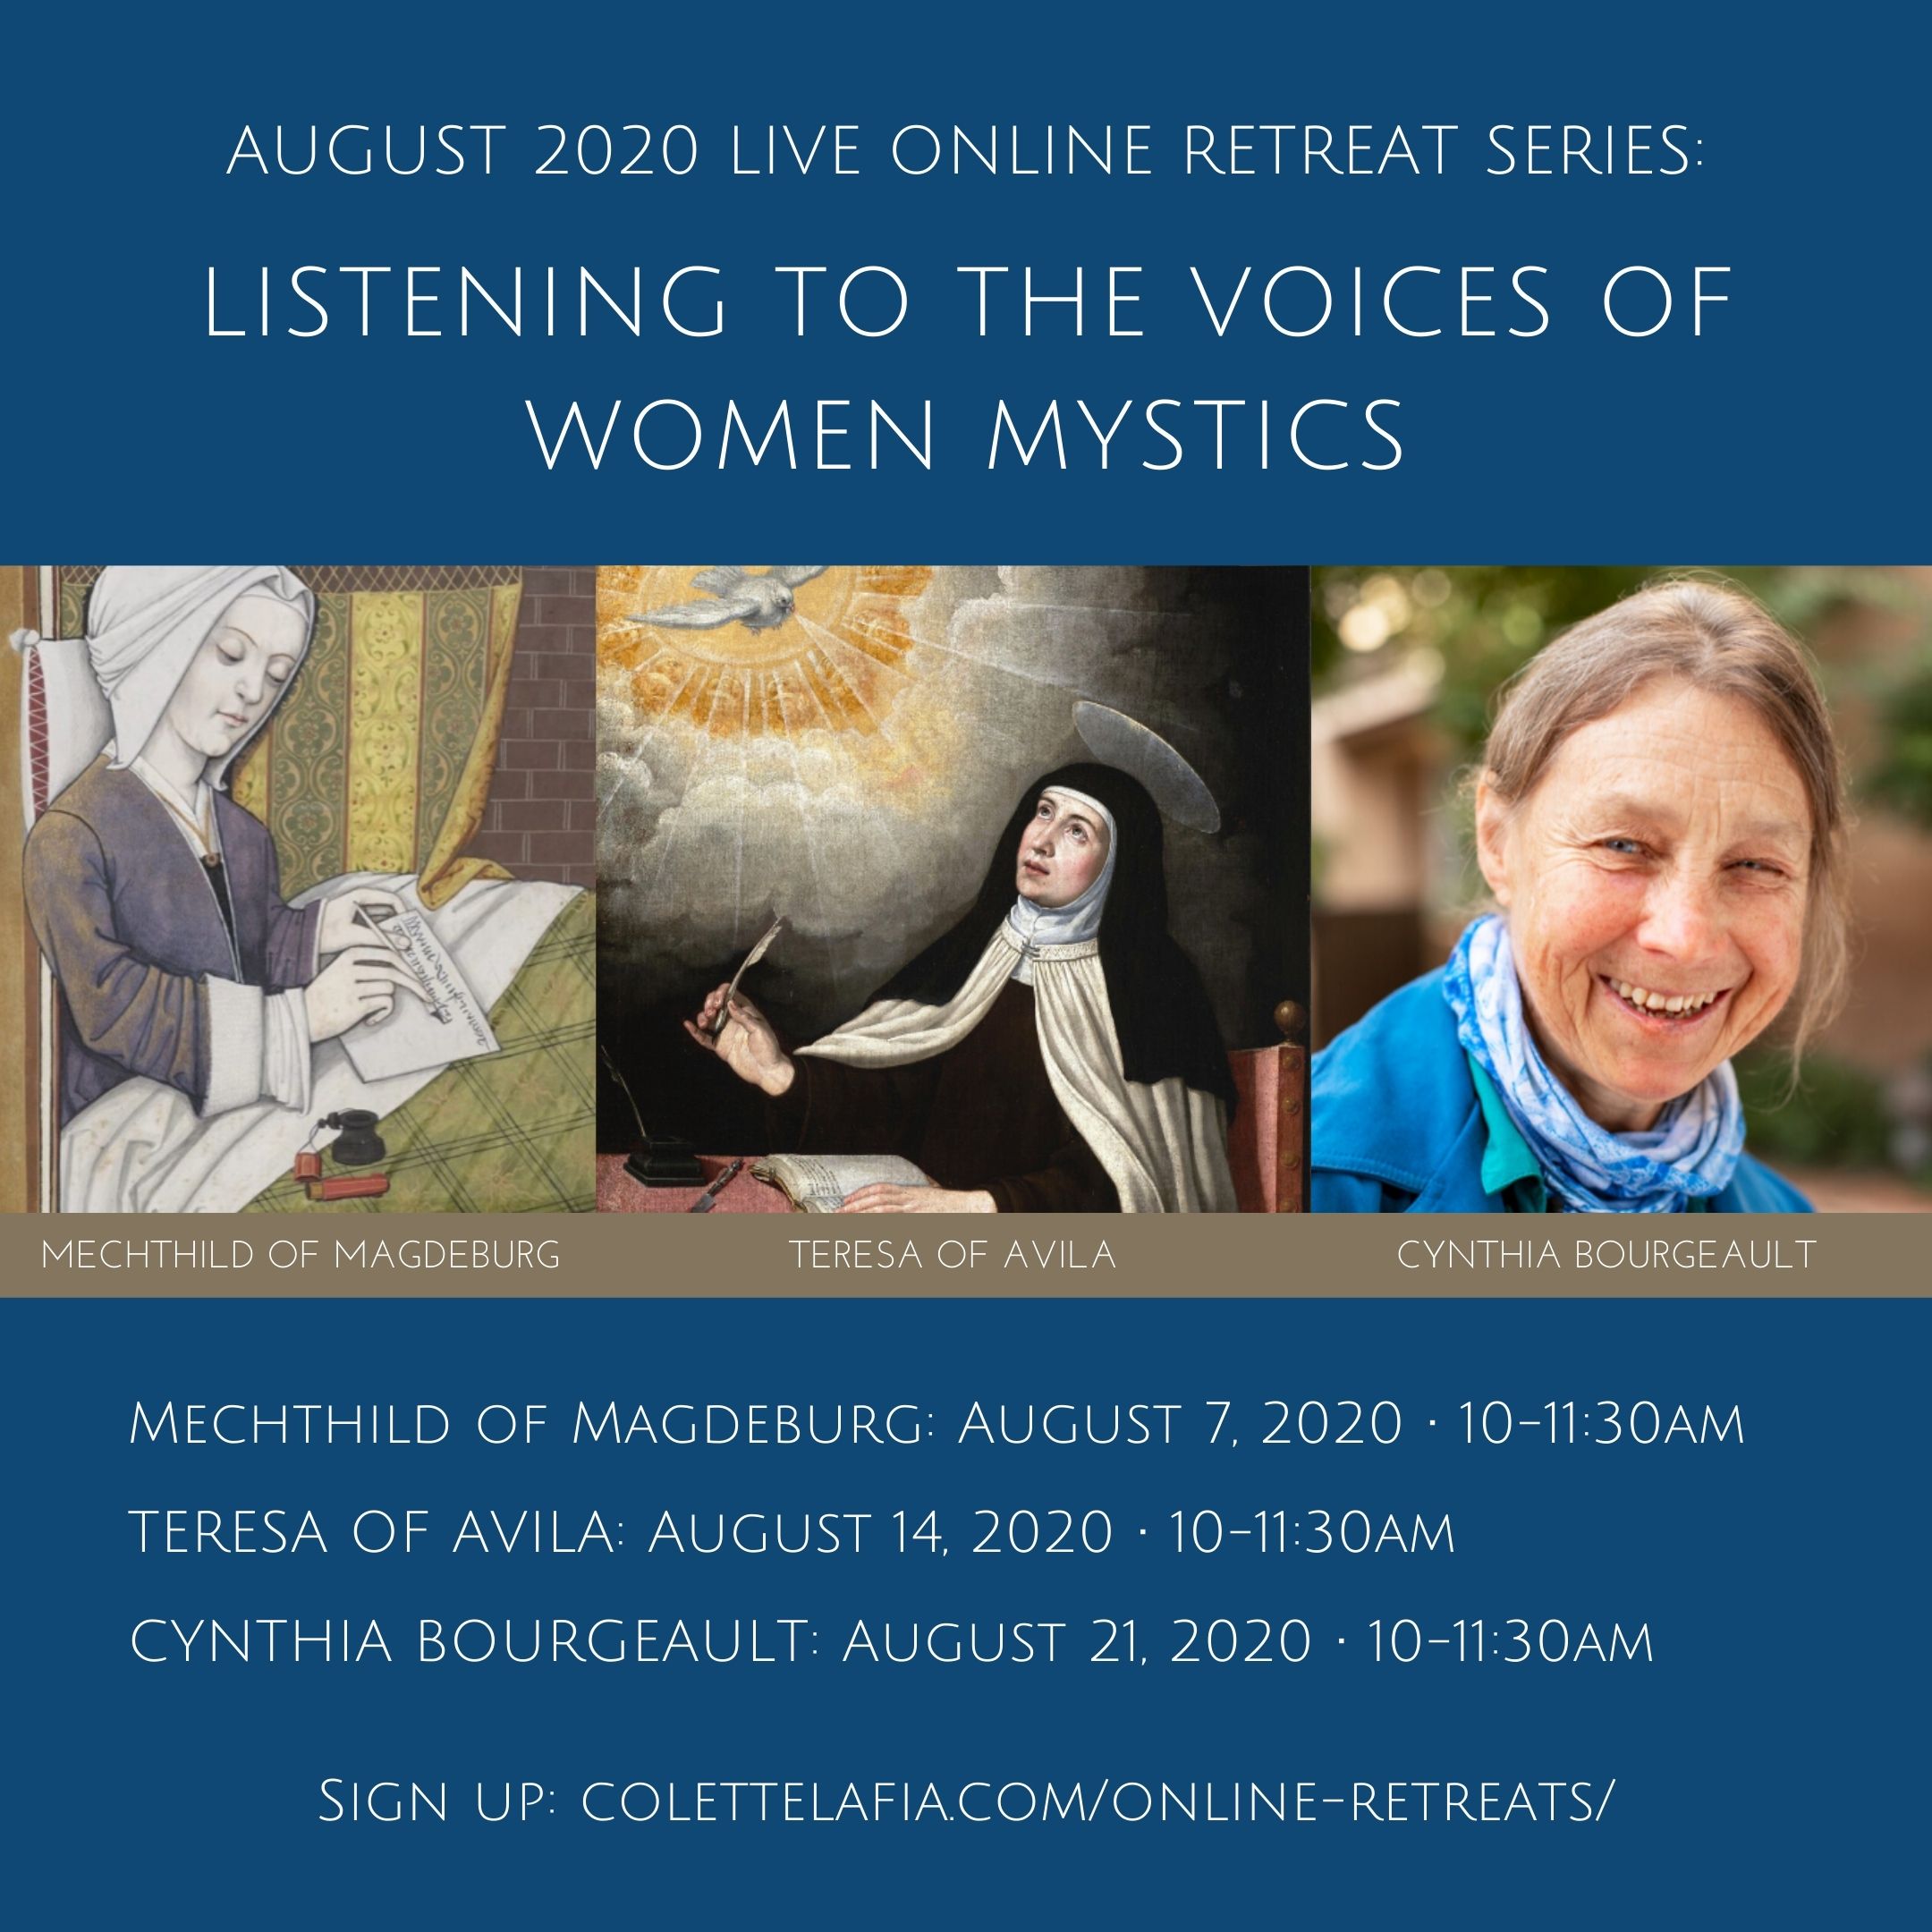 LISTENING TO THE VOICES OF WOMEN MYSTICS